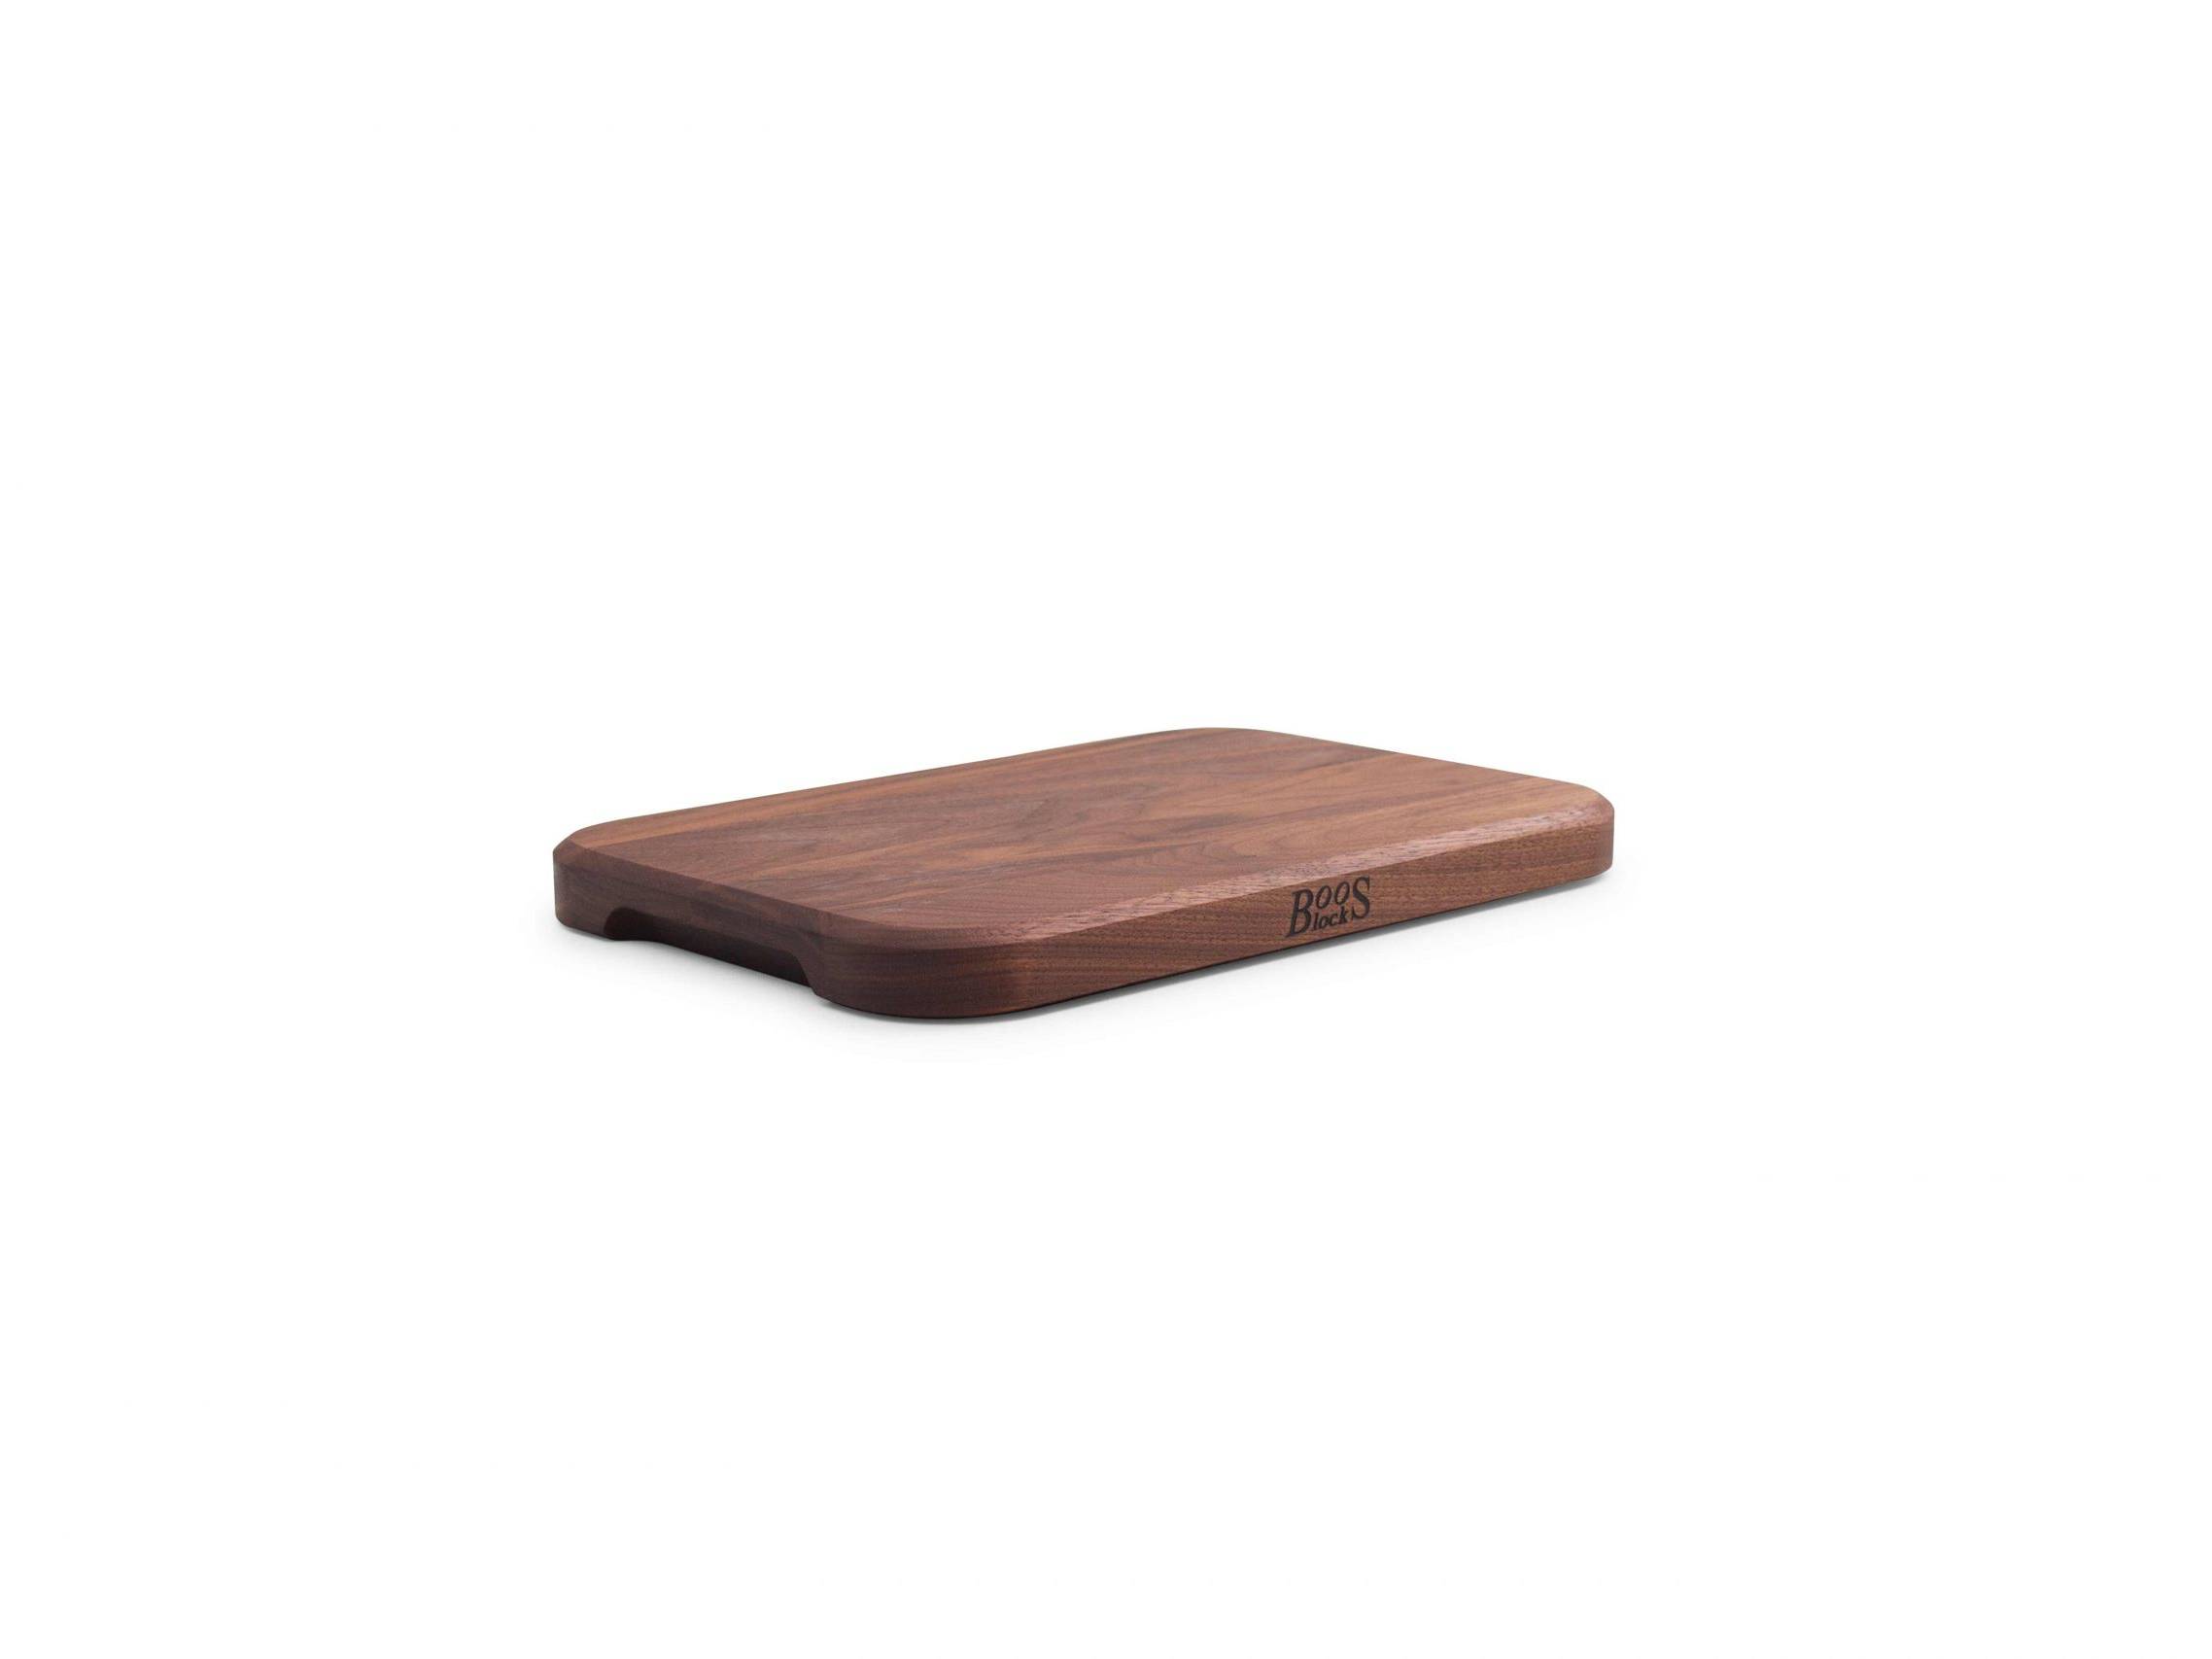 Chop-N-Serve Black Walnut chopping board with recessed grip; can be used on both sides 1